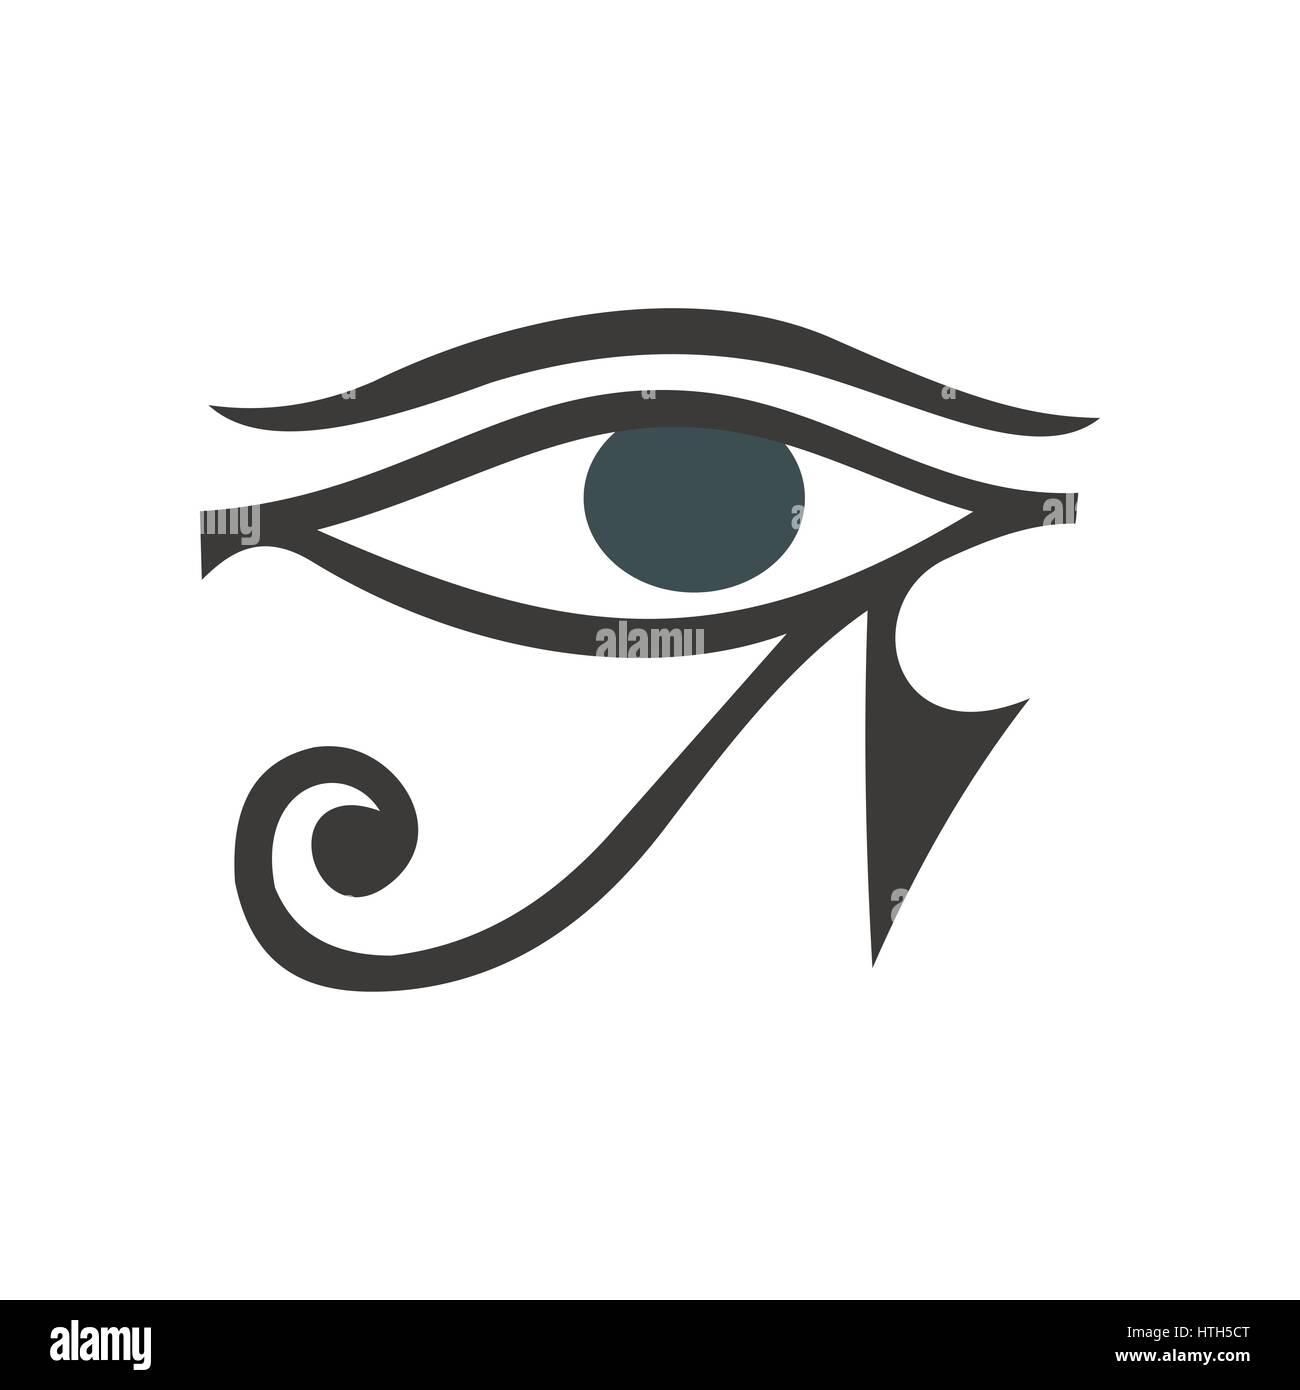 EGYPTIAN TATTOO IDEAS THAT WE LOVE IN 2023  alexie